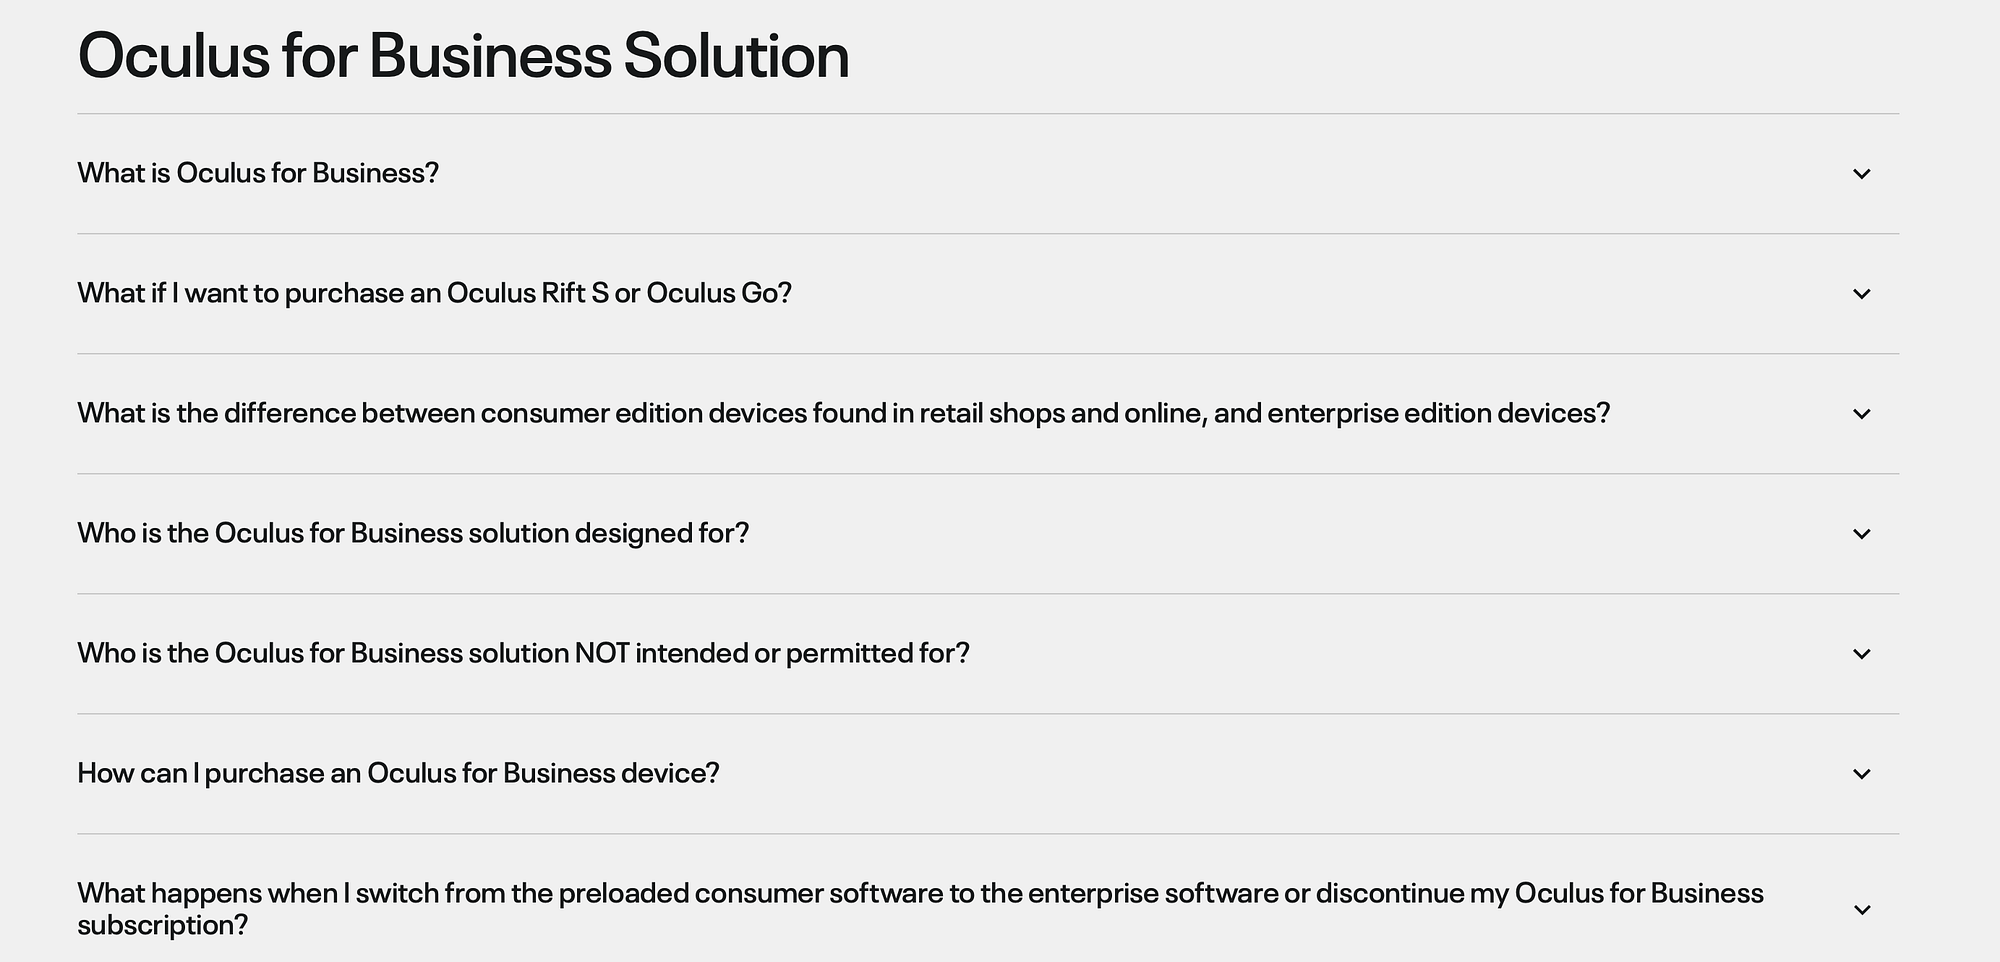 Oculus for Business FAQs